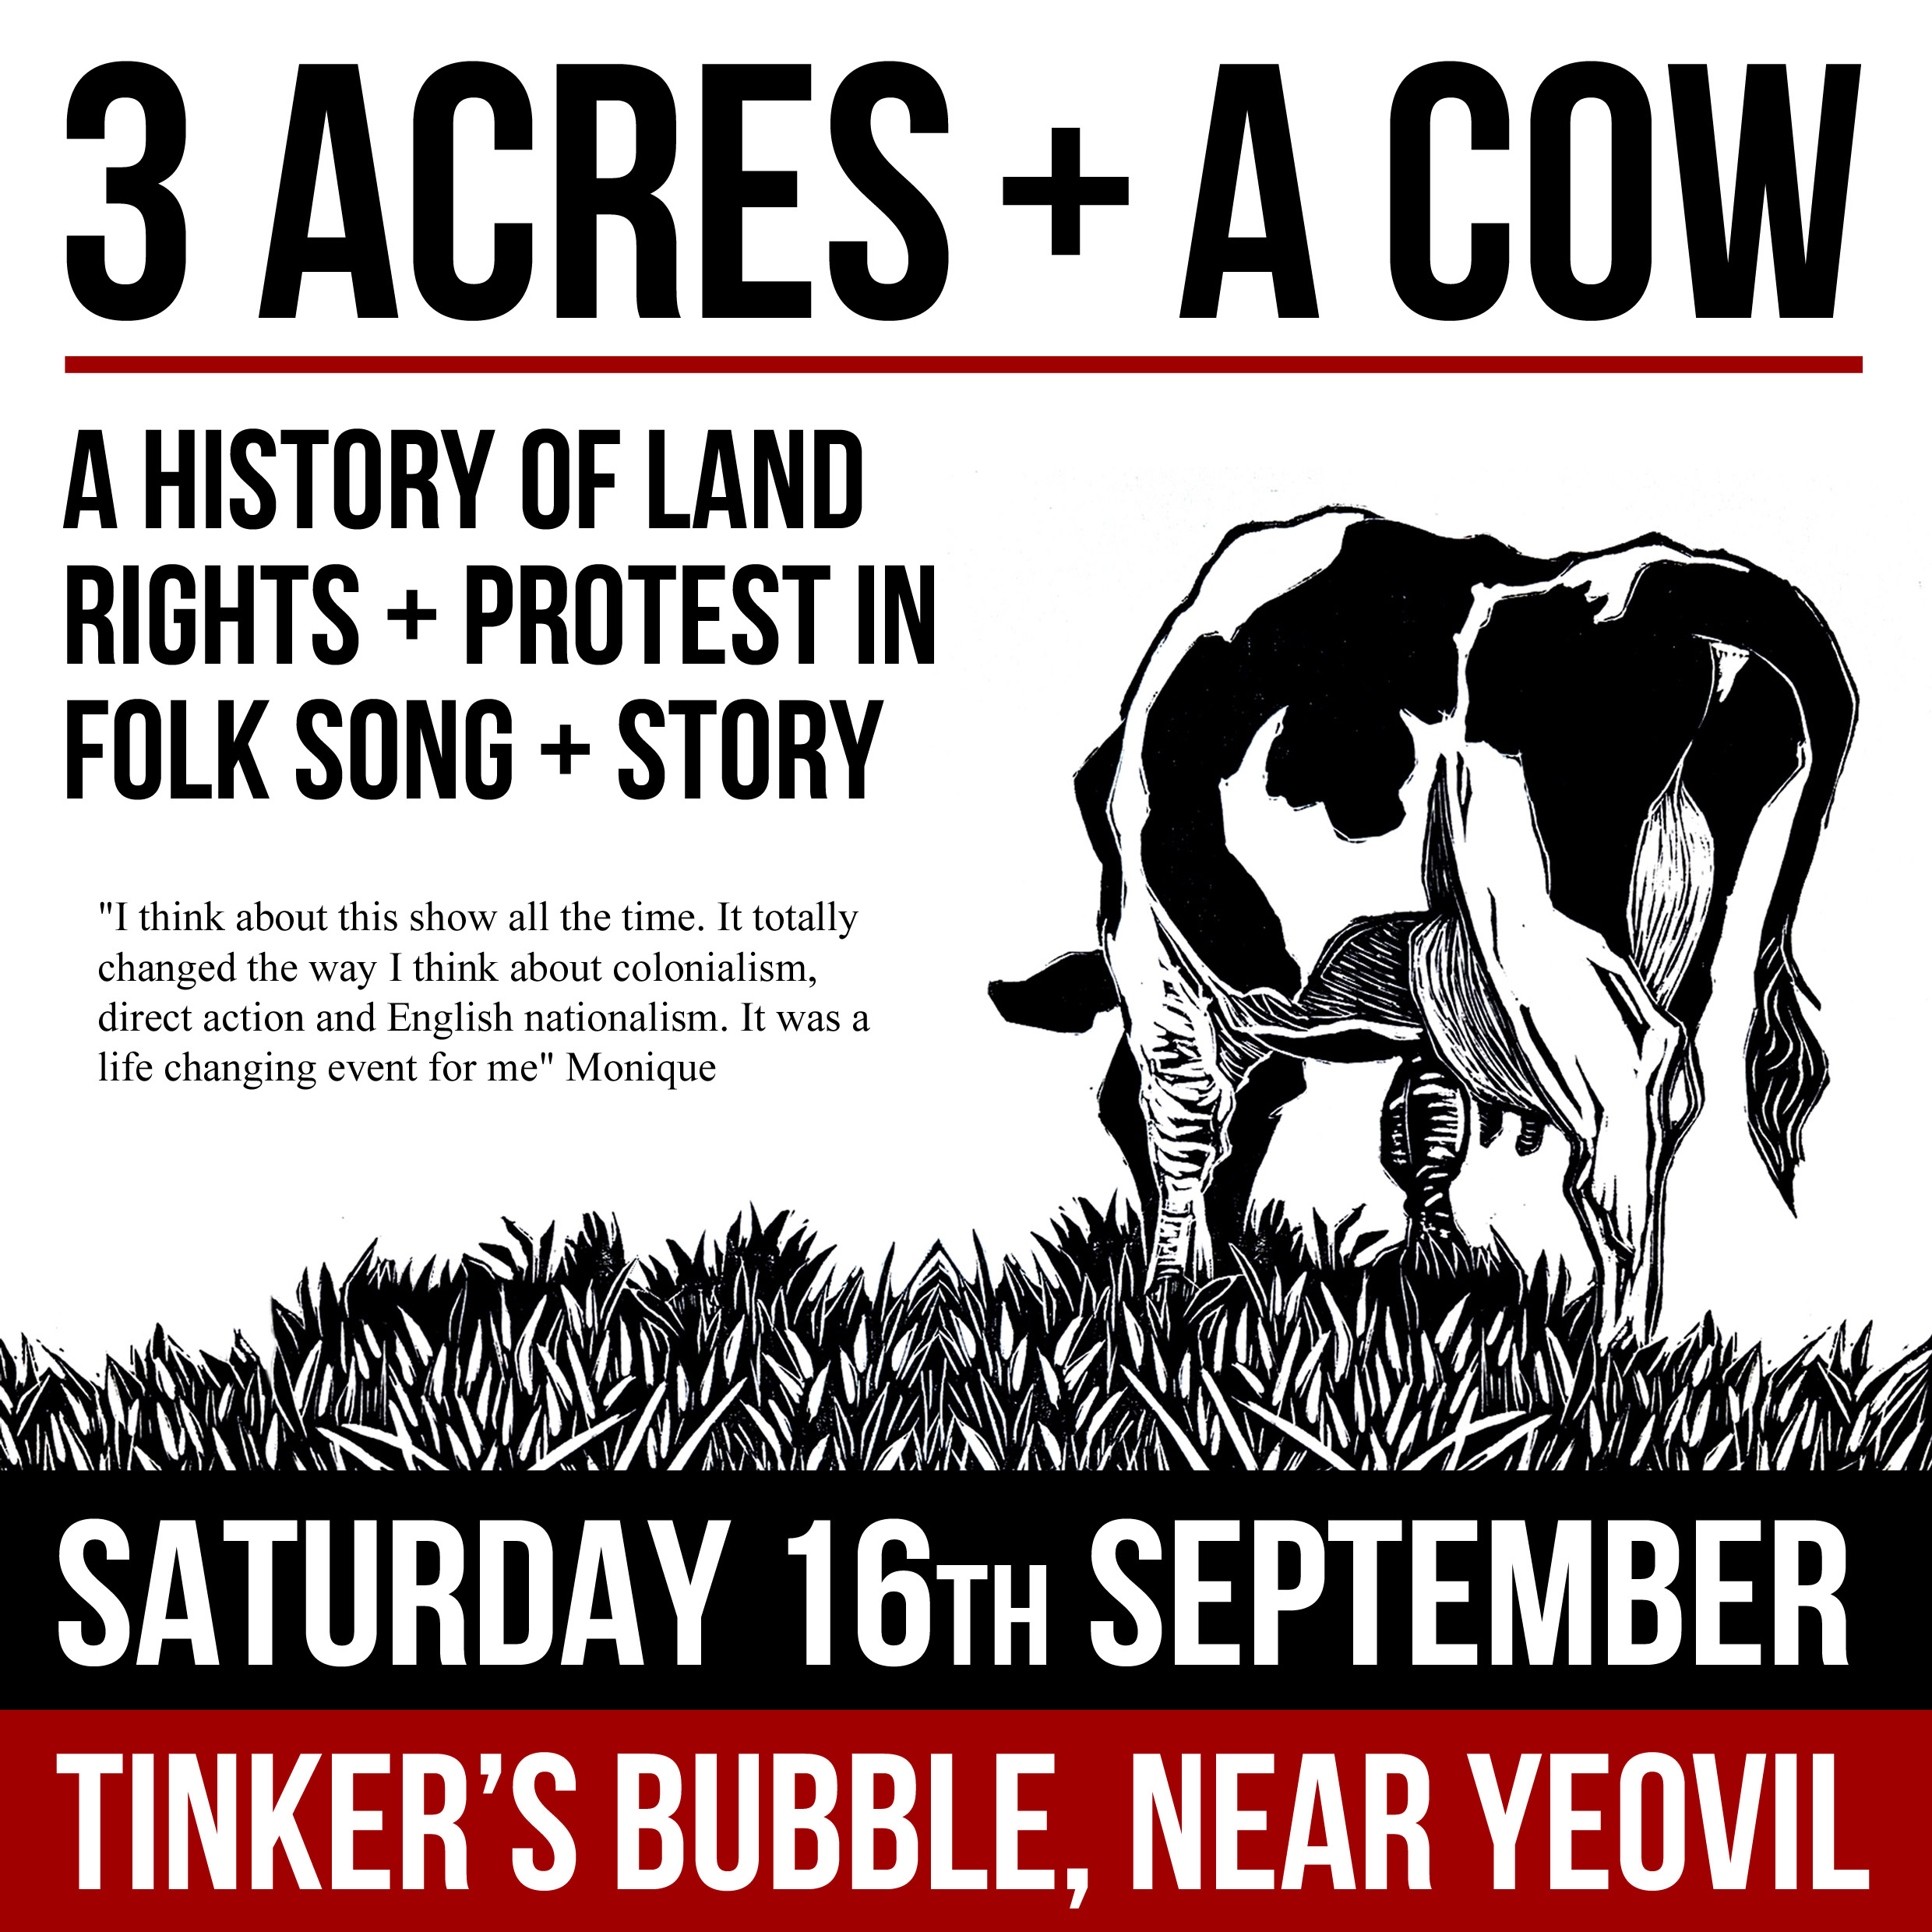 3 Acres and a Cow